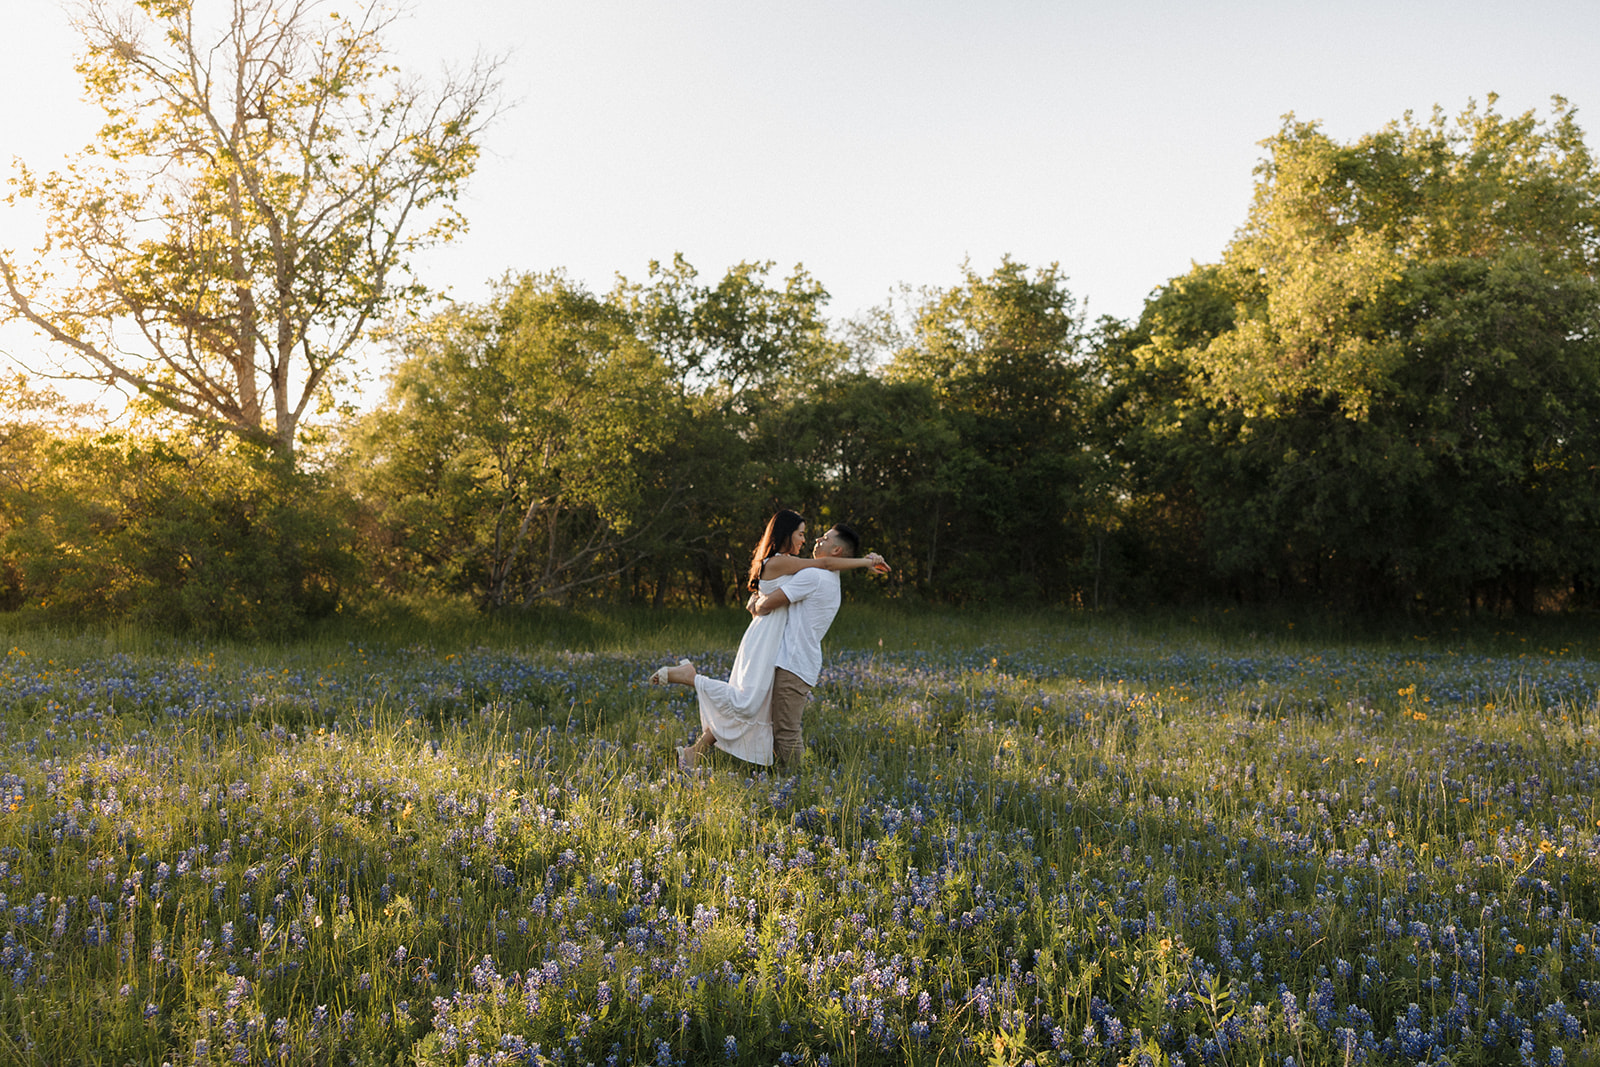 Couple hugging and running in field of Bluebonnets h at McKinney Falls state park